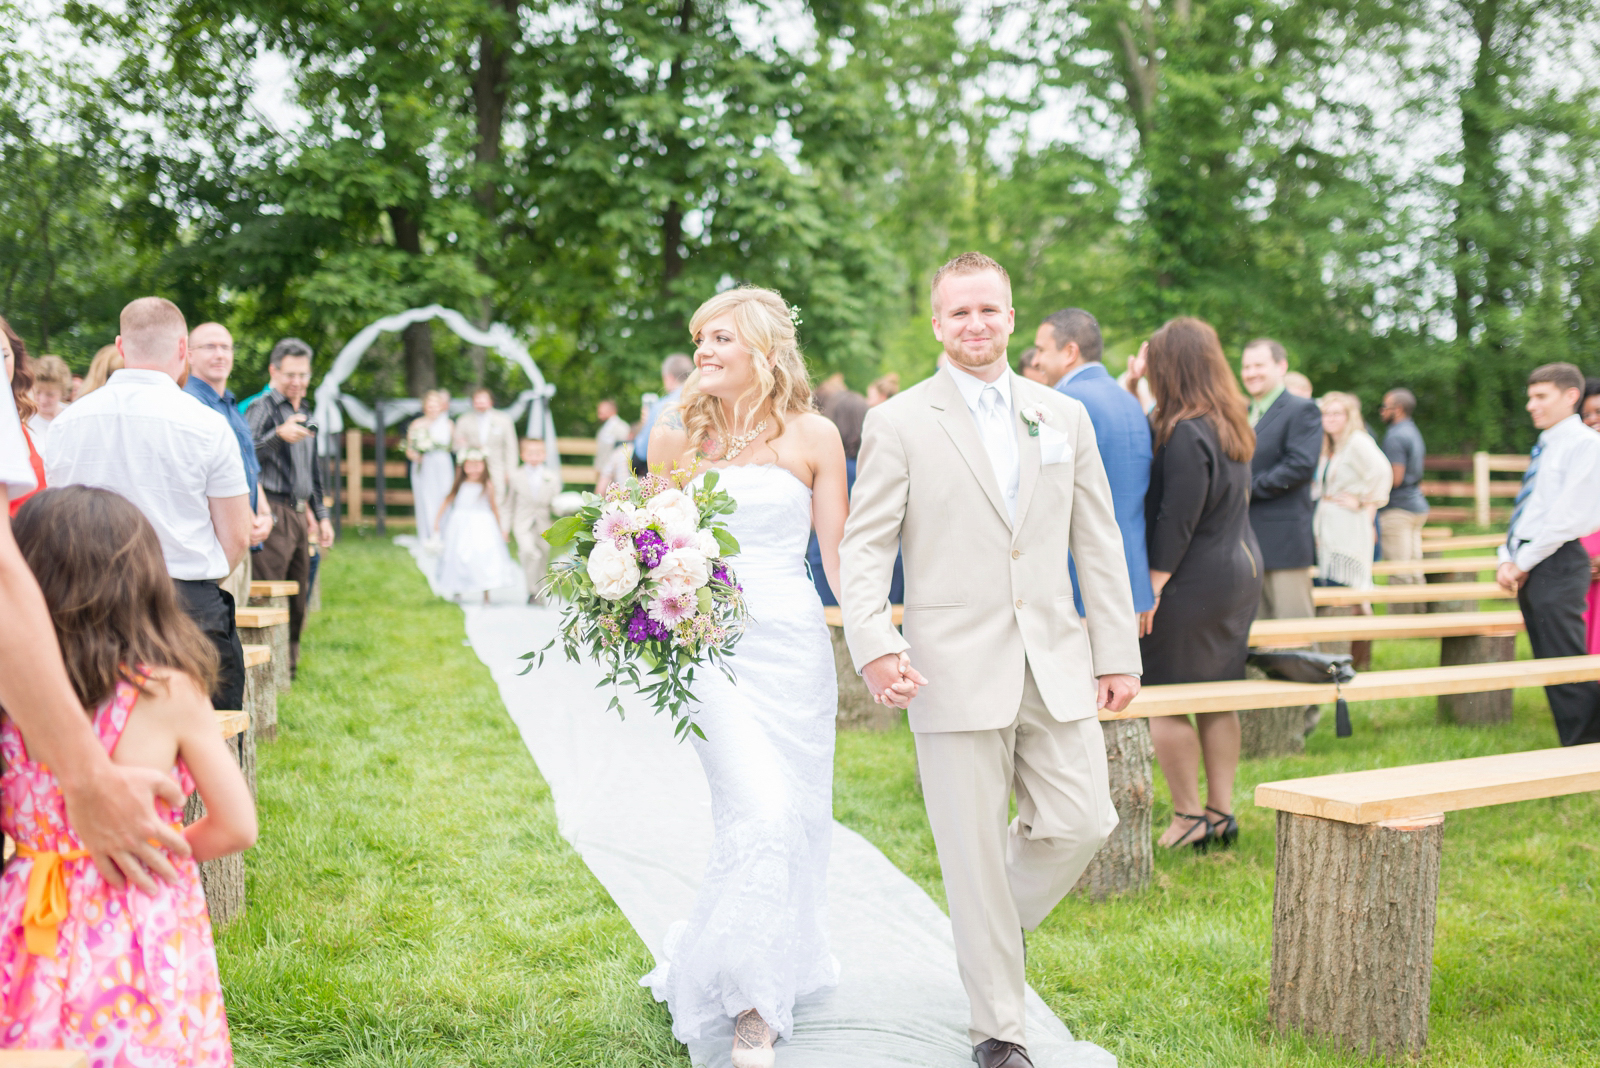 beautiful-outdoor-wedding-venue-with-trees-old-blue-rooster-ohio-46